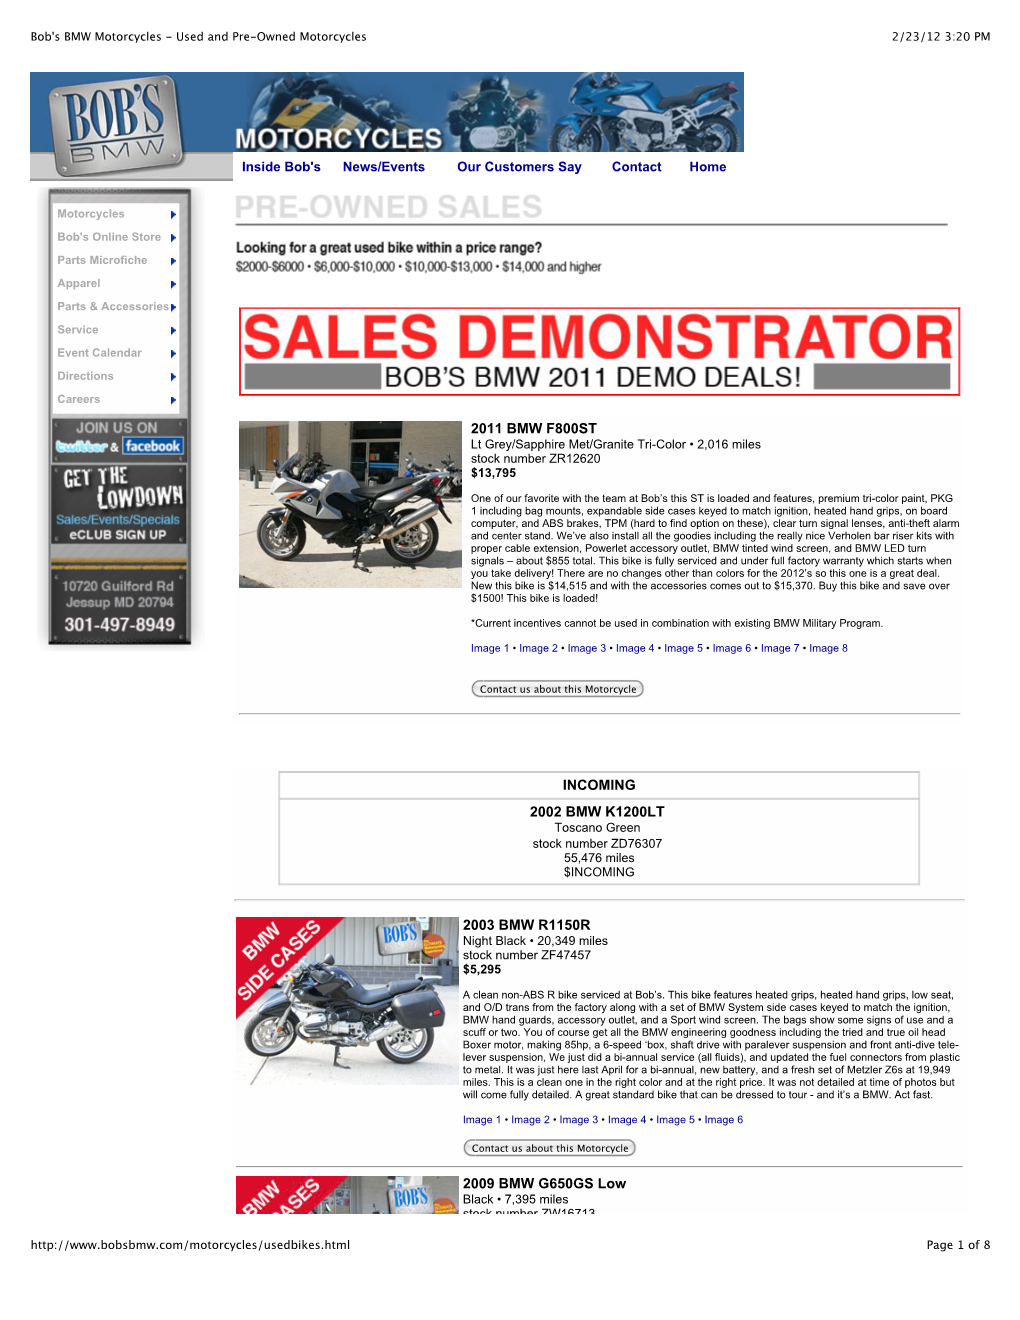 Bob's BMW Motorcycles - Used and Pre-Owned Motorcycles 2/23/12 3:20 PM